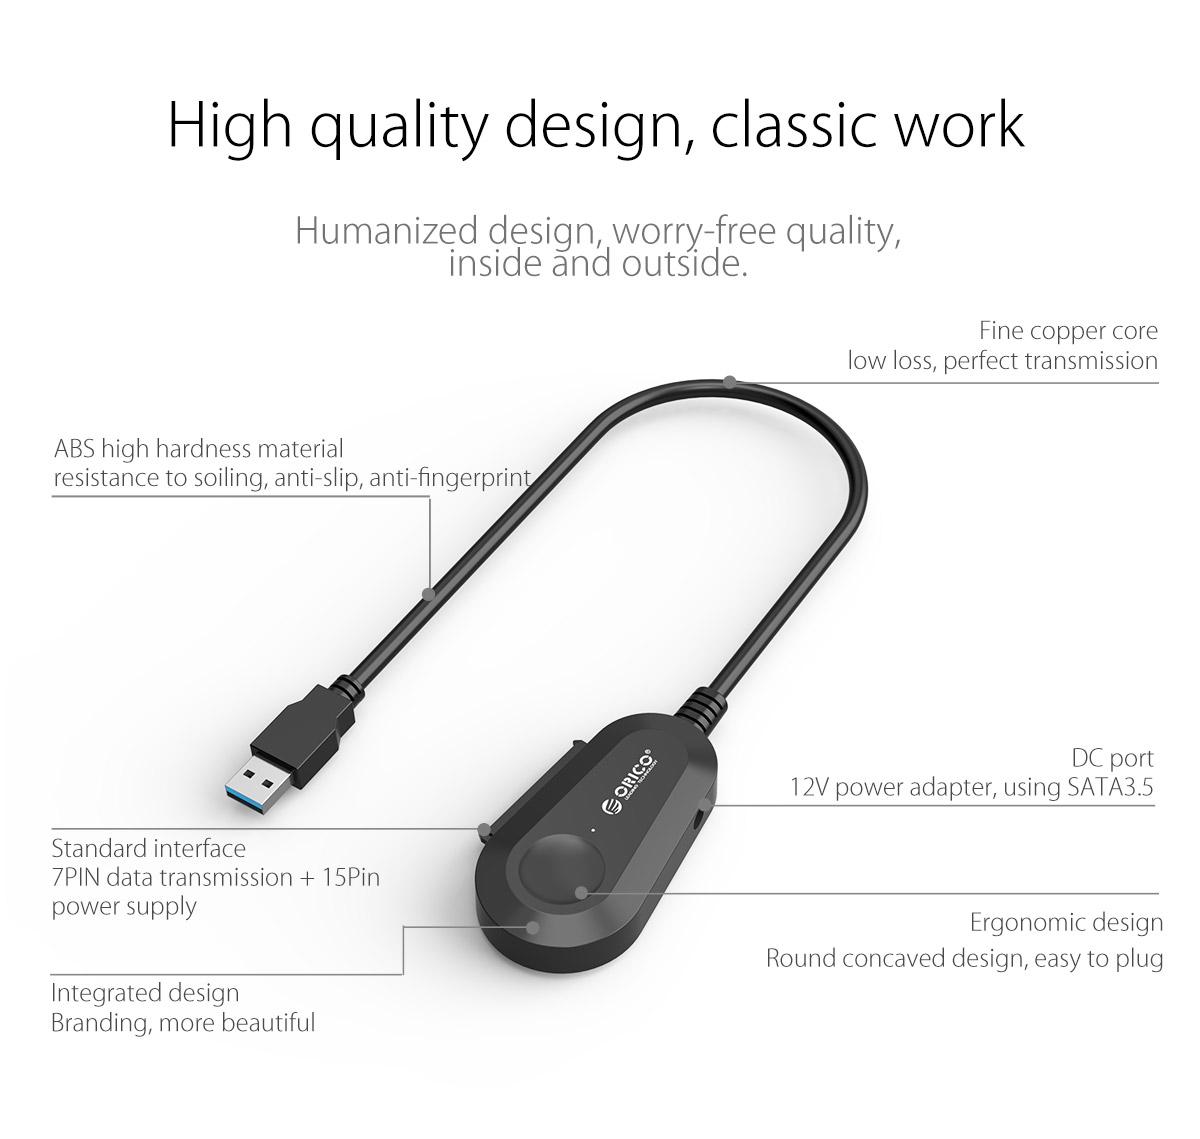 3.5 inch hard drive adapter is high quality design